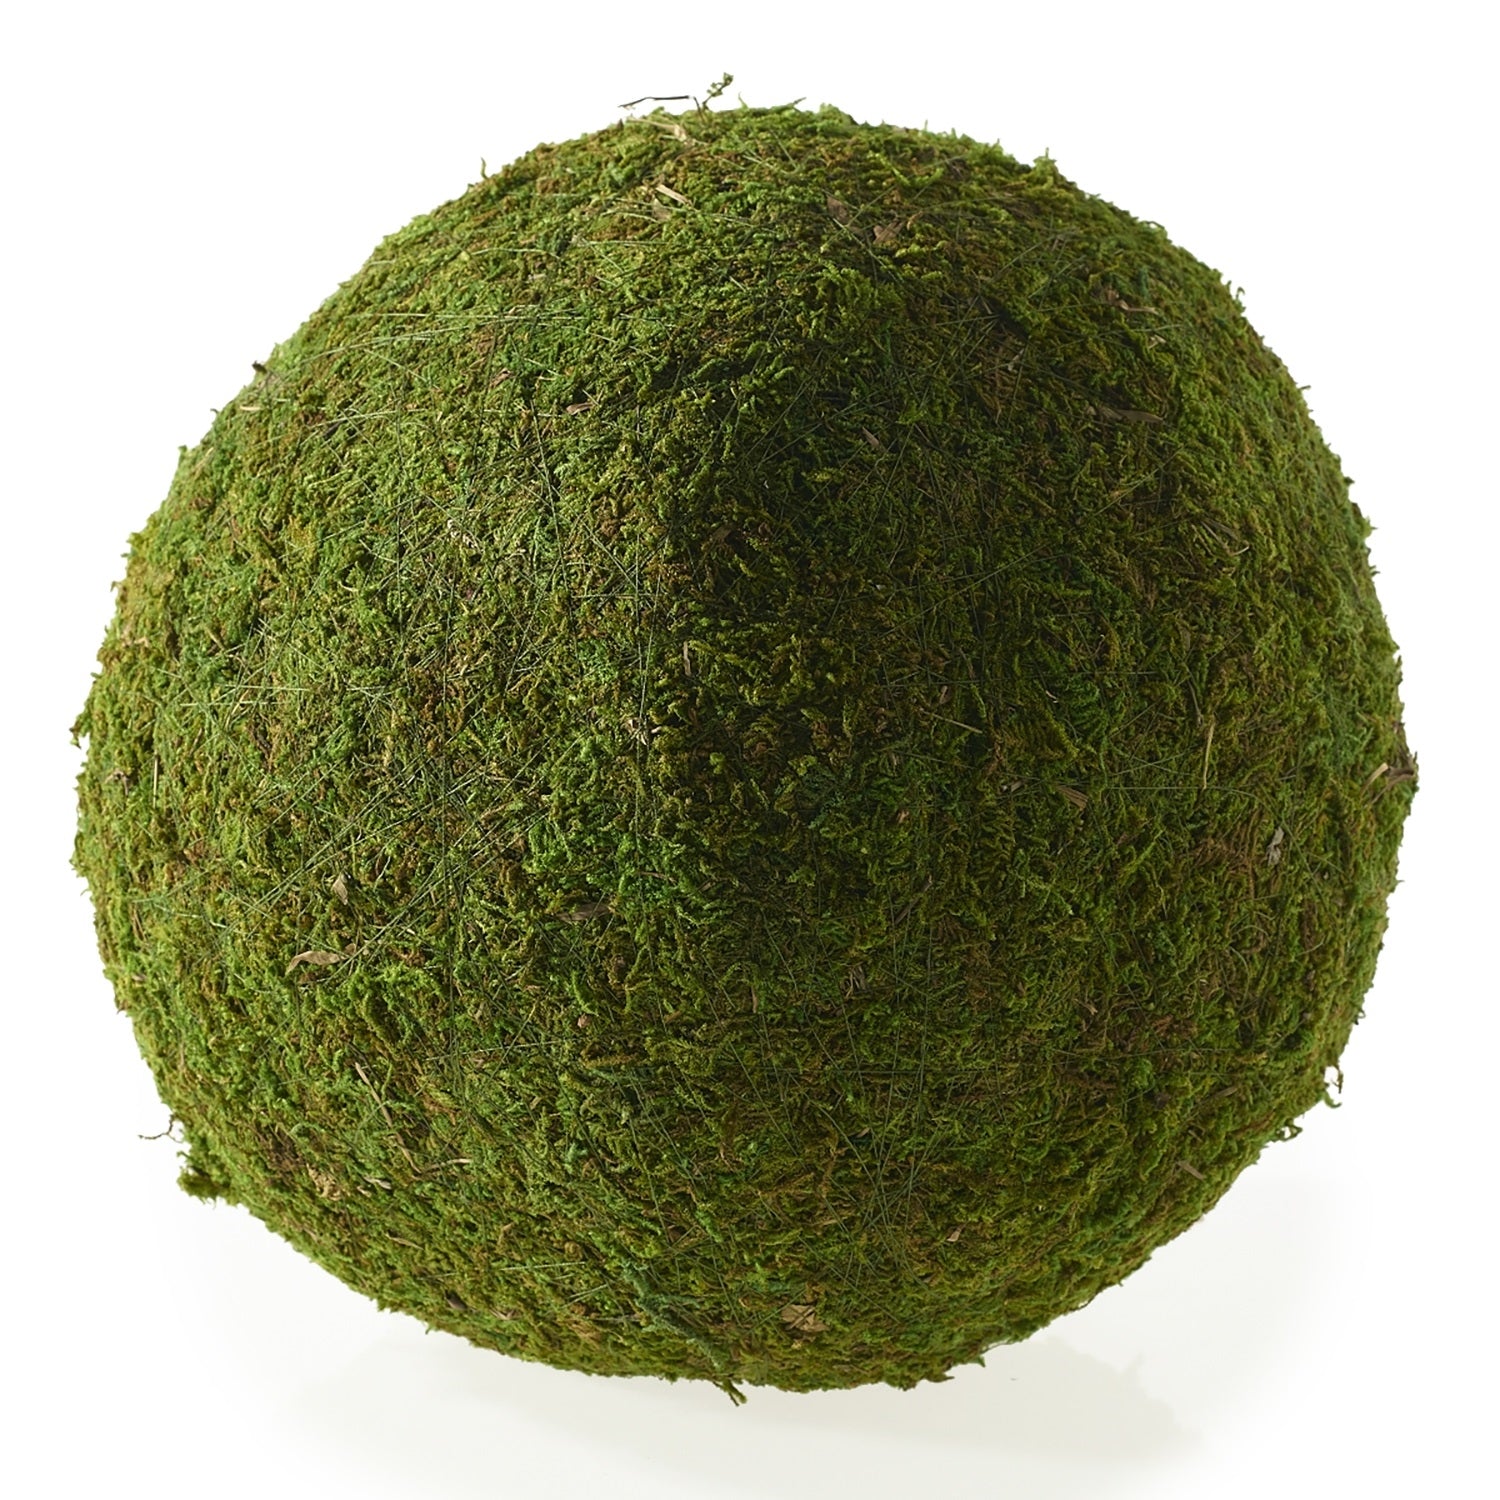 Moss Ball Md 5 Forever Green Art 5 inch Medium Preserved Moss Ball made in  America [mos05] - $21.00 : Forever Green Art, Preserved Plants for Home and  Business